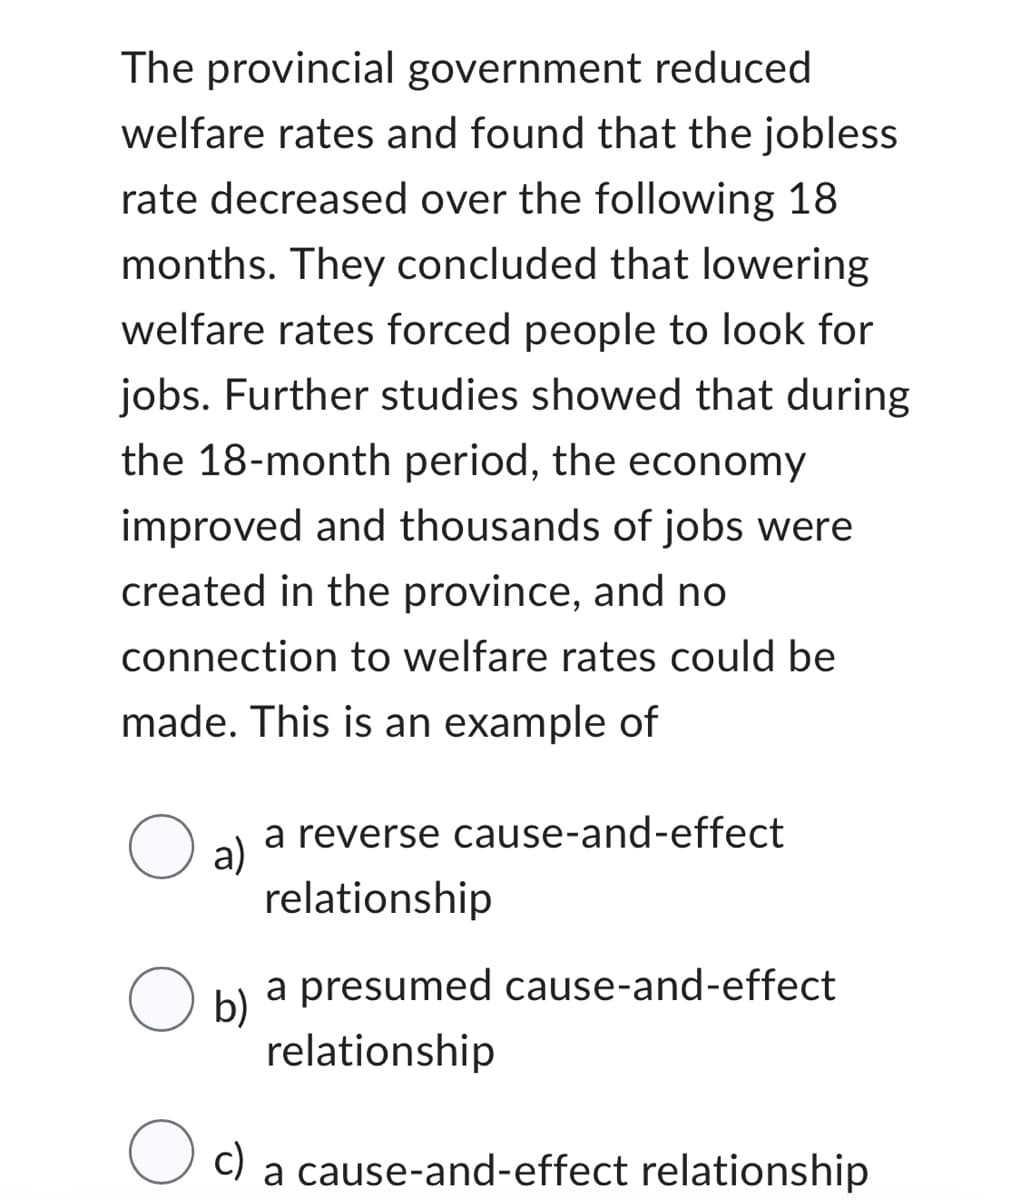 The provincial government reduced
welfare rates and found that the jobless
rate decreased over the following 18
months. They concluded that lowering
welfare rates forced people to look for
jobs. Further studies showed that during
the 18-month period, the economy
improved and thousands of jobs were
created in the province, and no
connection to welfare rates could be
made. This is an example of
O al
a reverse cause-and-effect
relationship
a presumed cause-and-effect
relationship
c) a cause-and-effect relationship
O b)